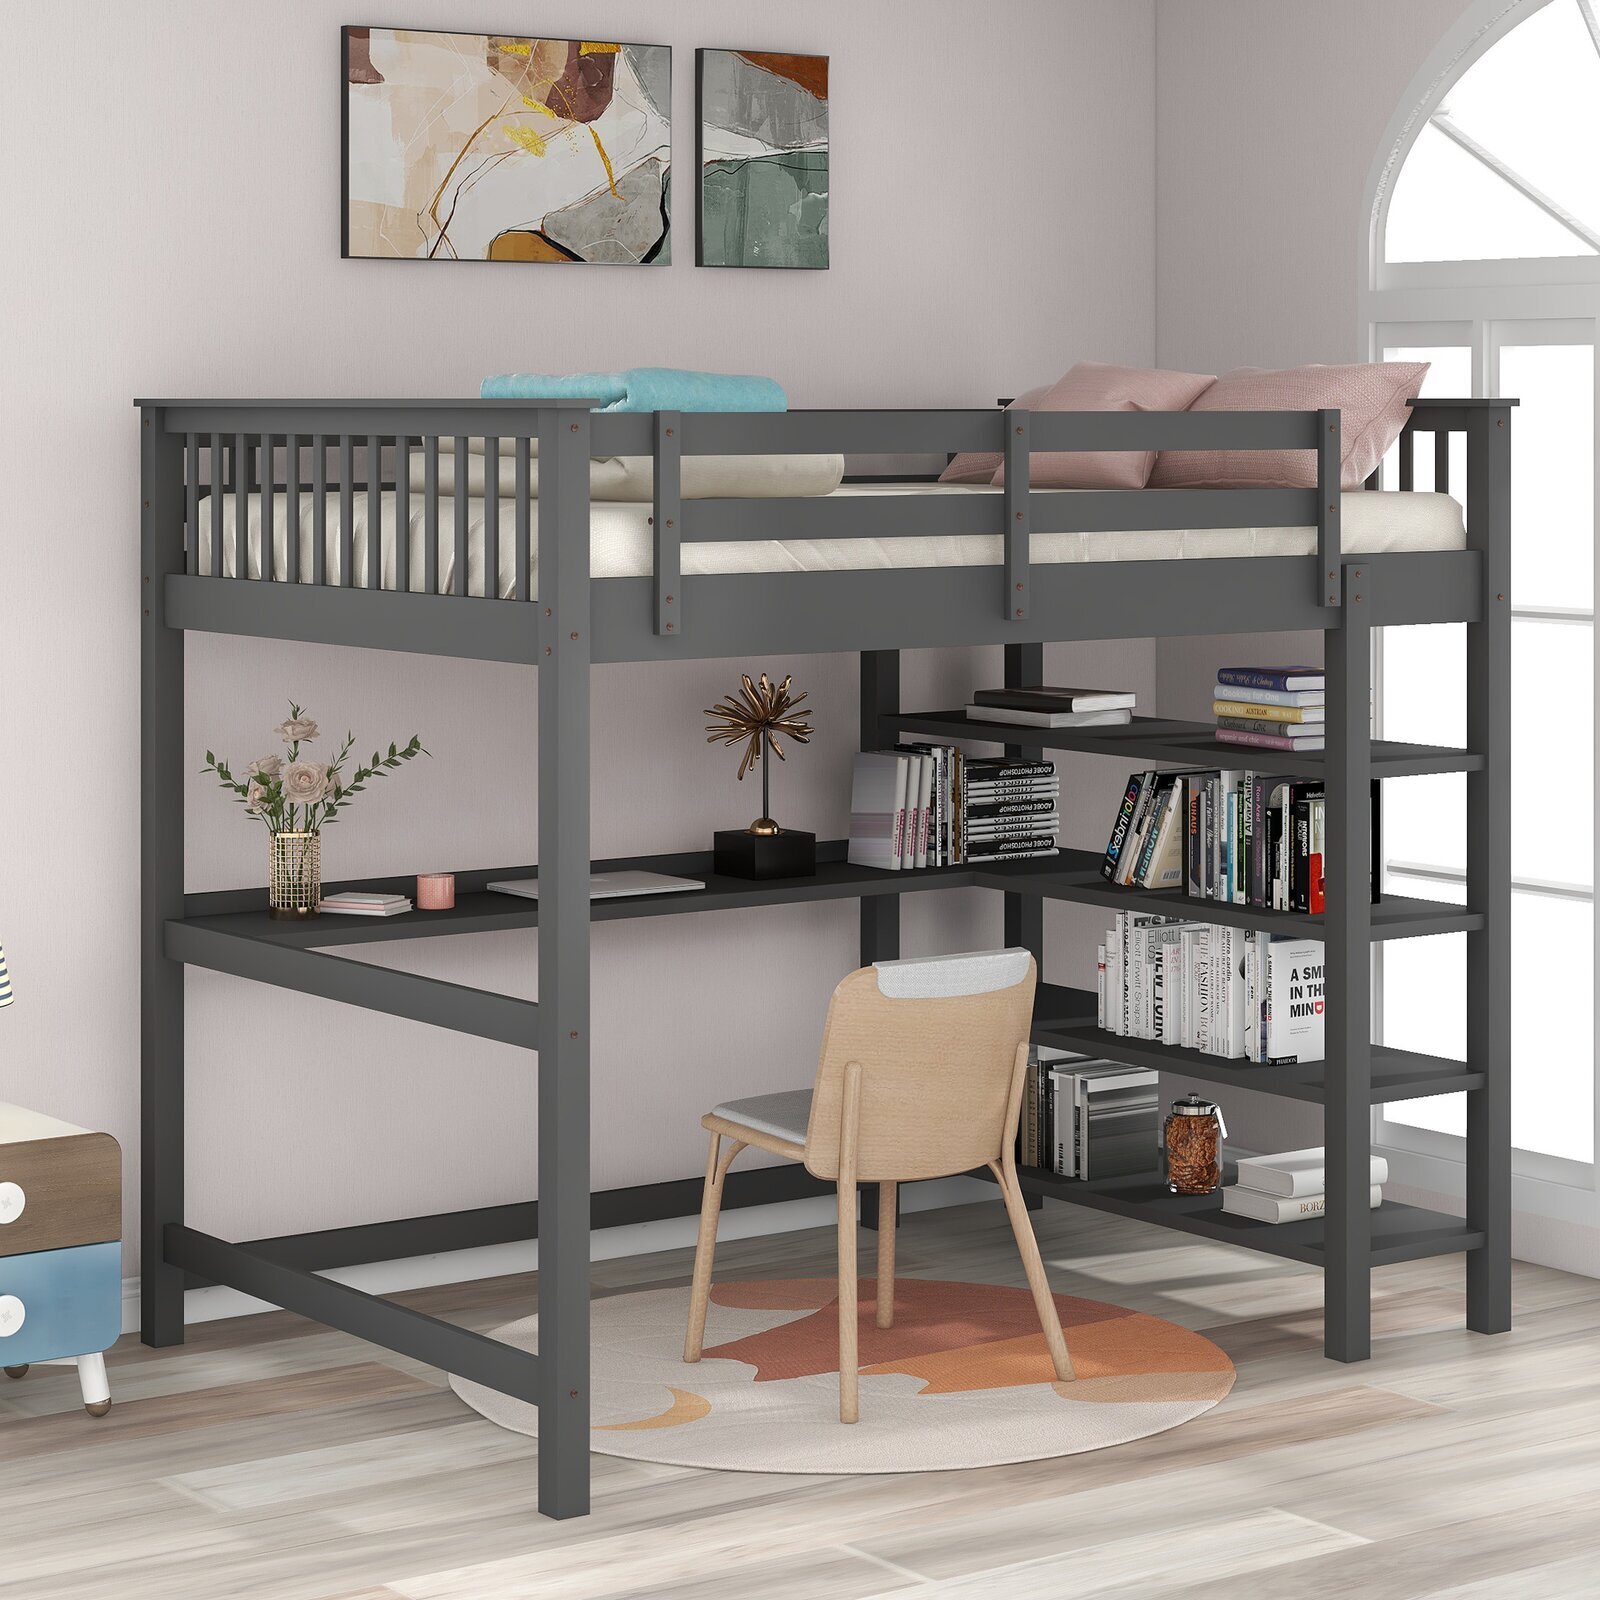 Adult Loft Bed with Desk and Floor to Bunk Full length Wooden Bookshelves